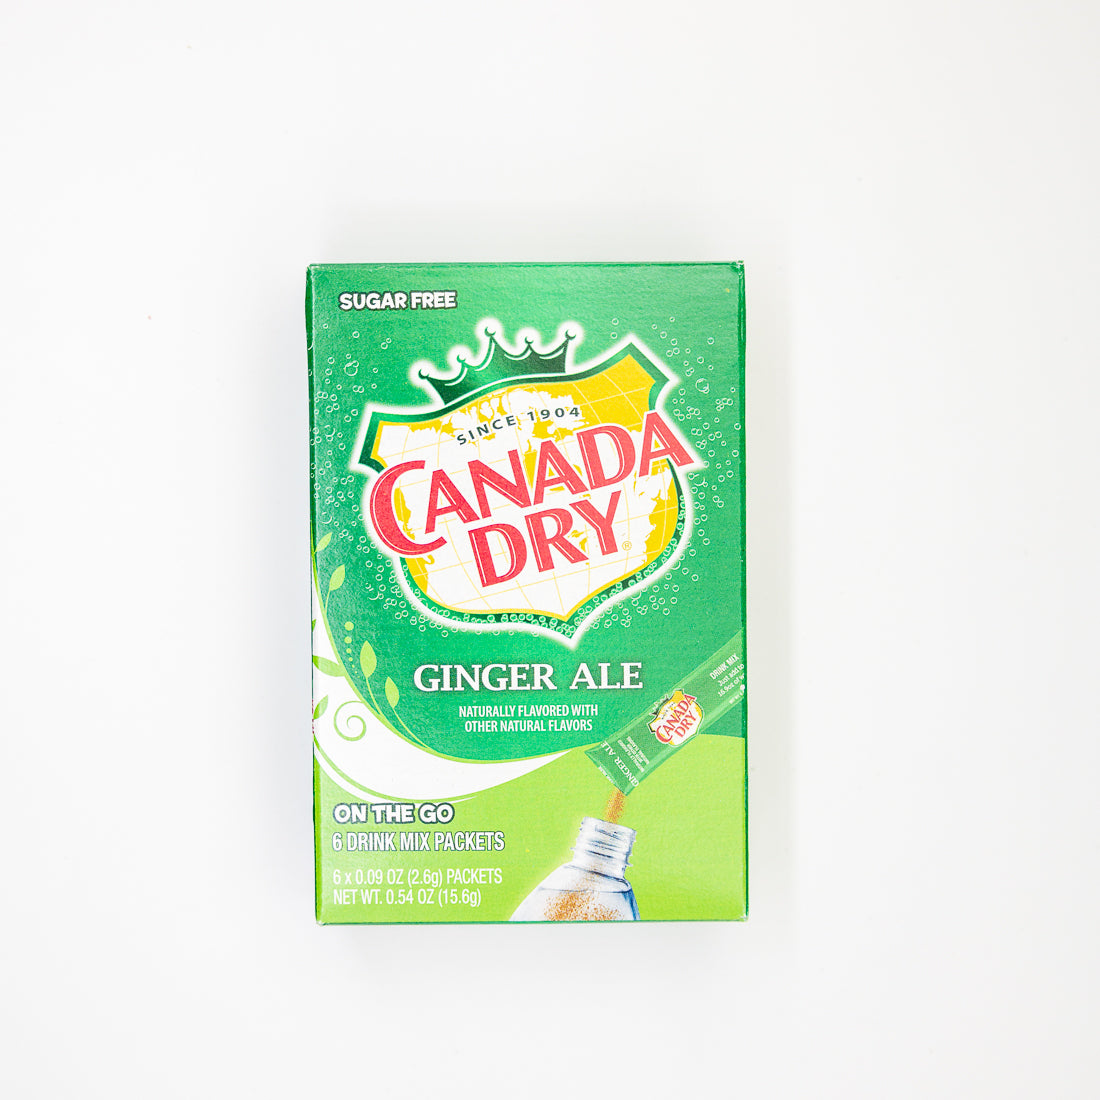 Sugar Free Canada Dry Ginger Ale Drink Mix